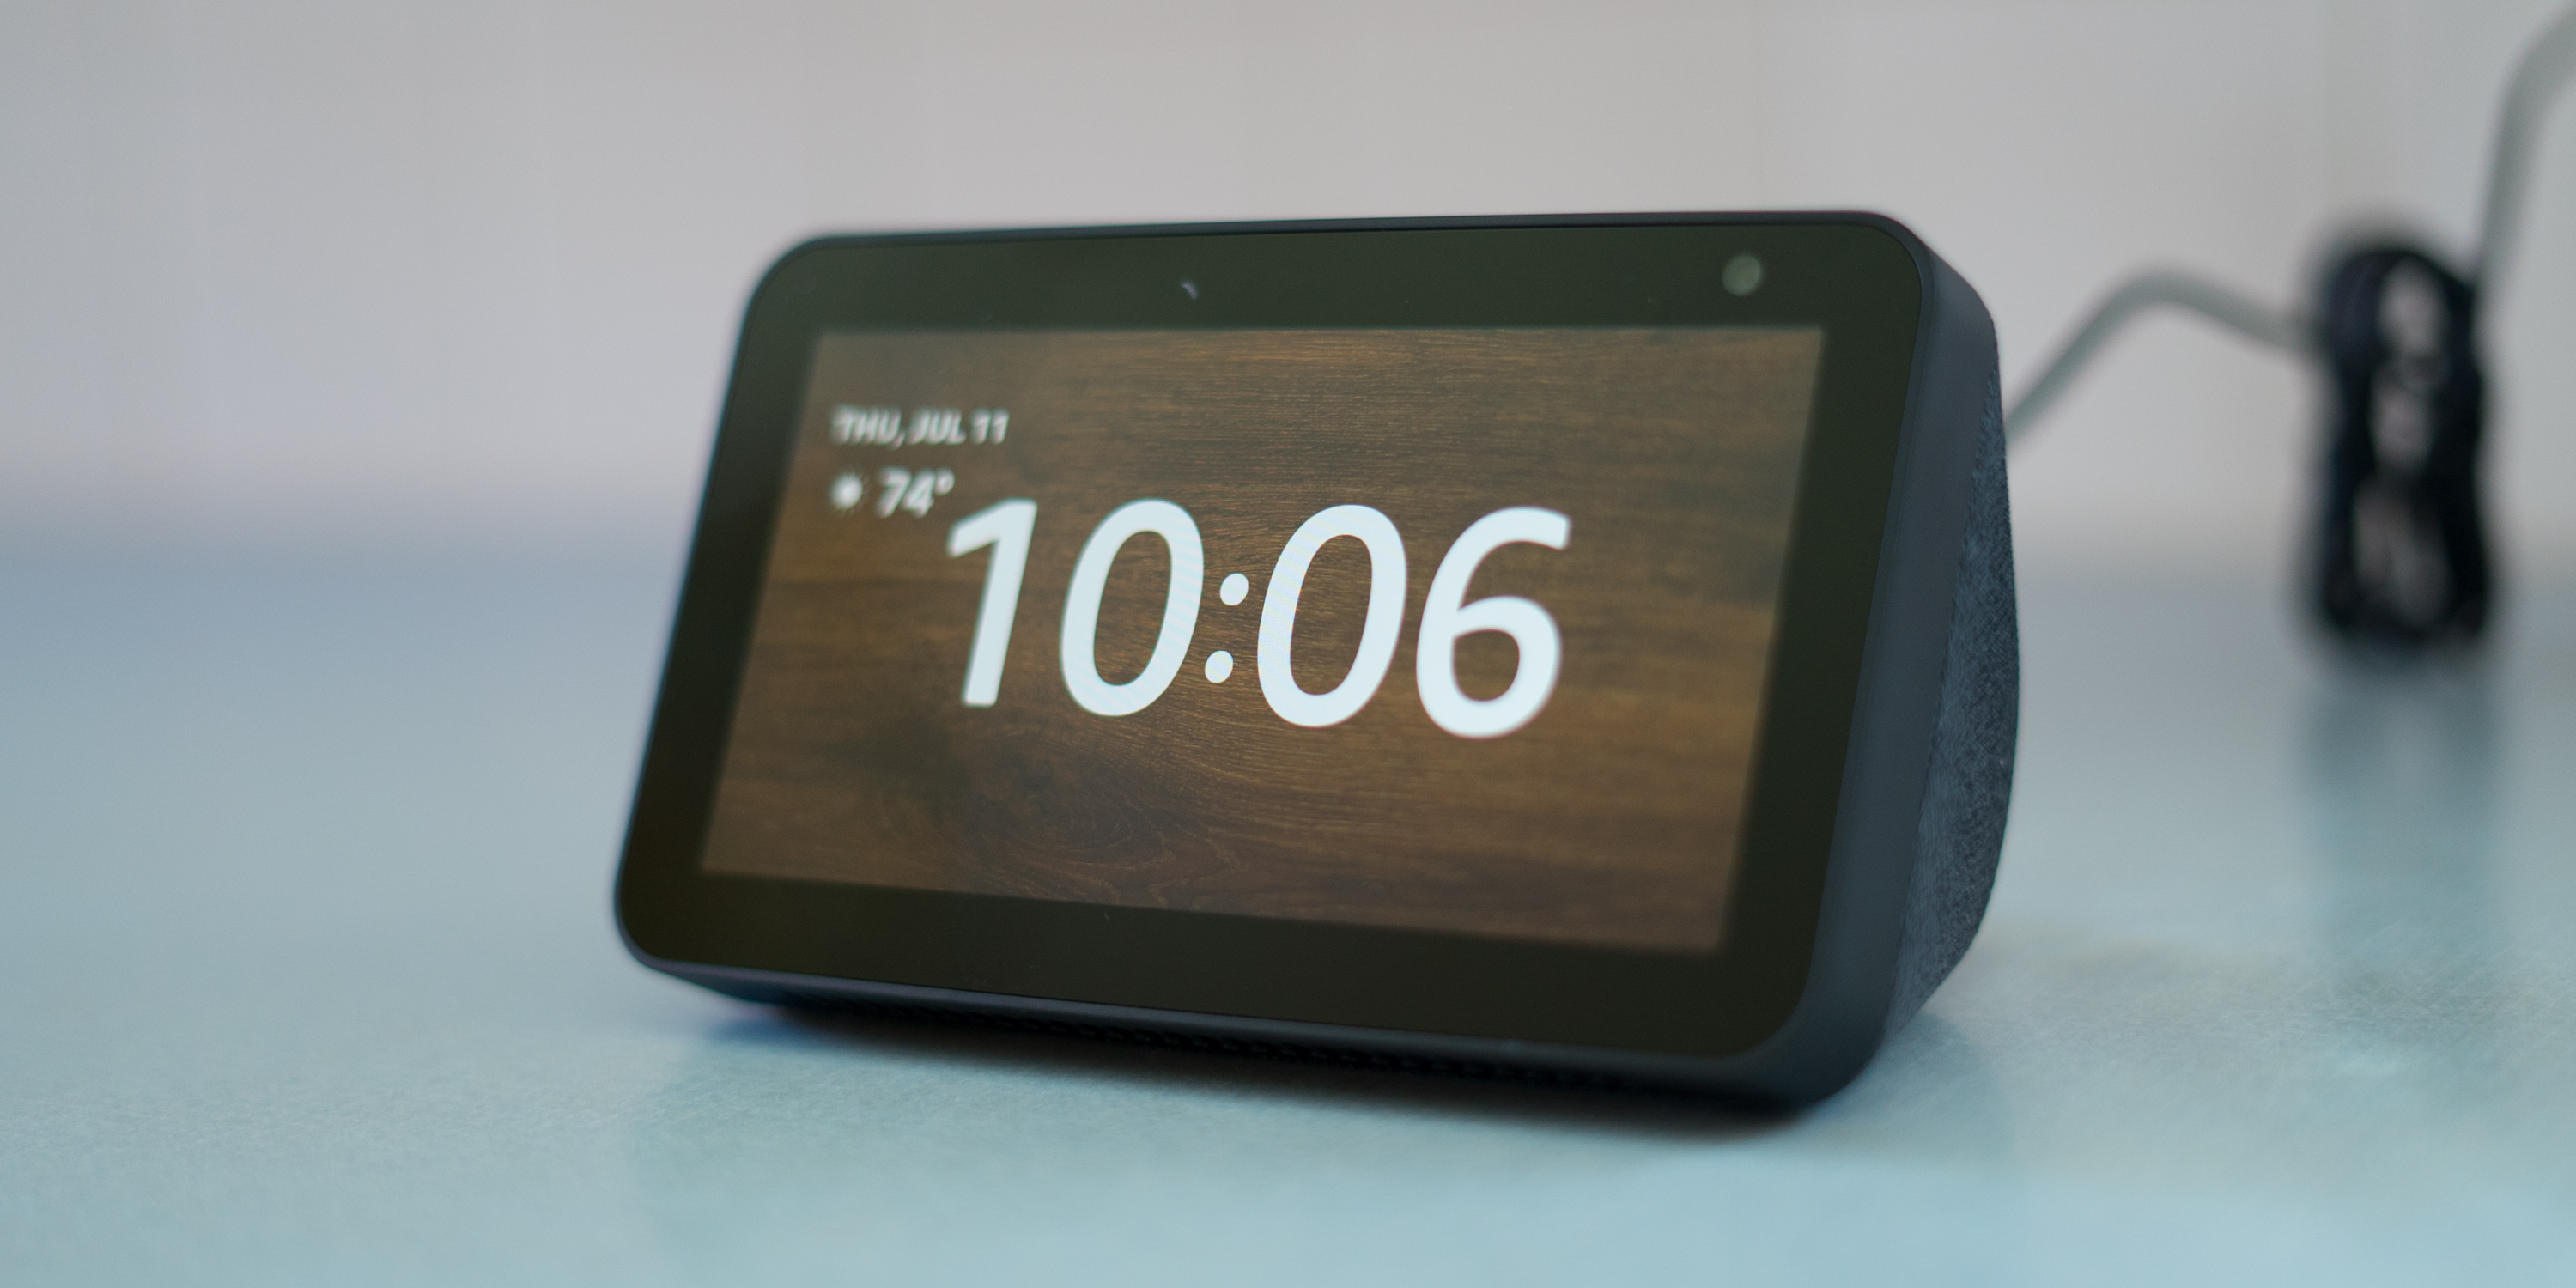 Amazon Echo Show 5 Review: Quick look at the new Alexa Smart Display